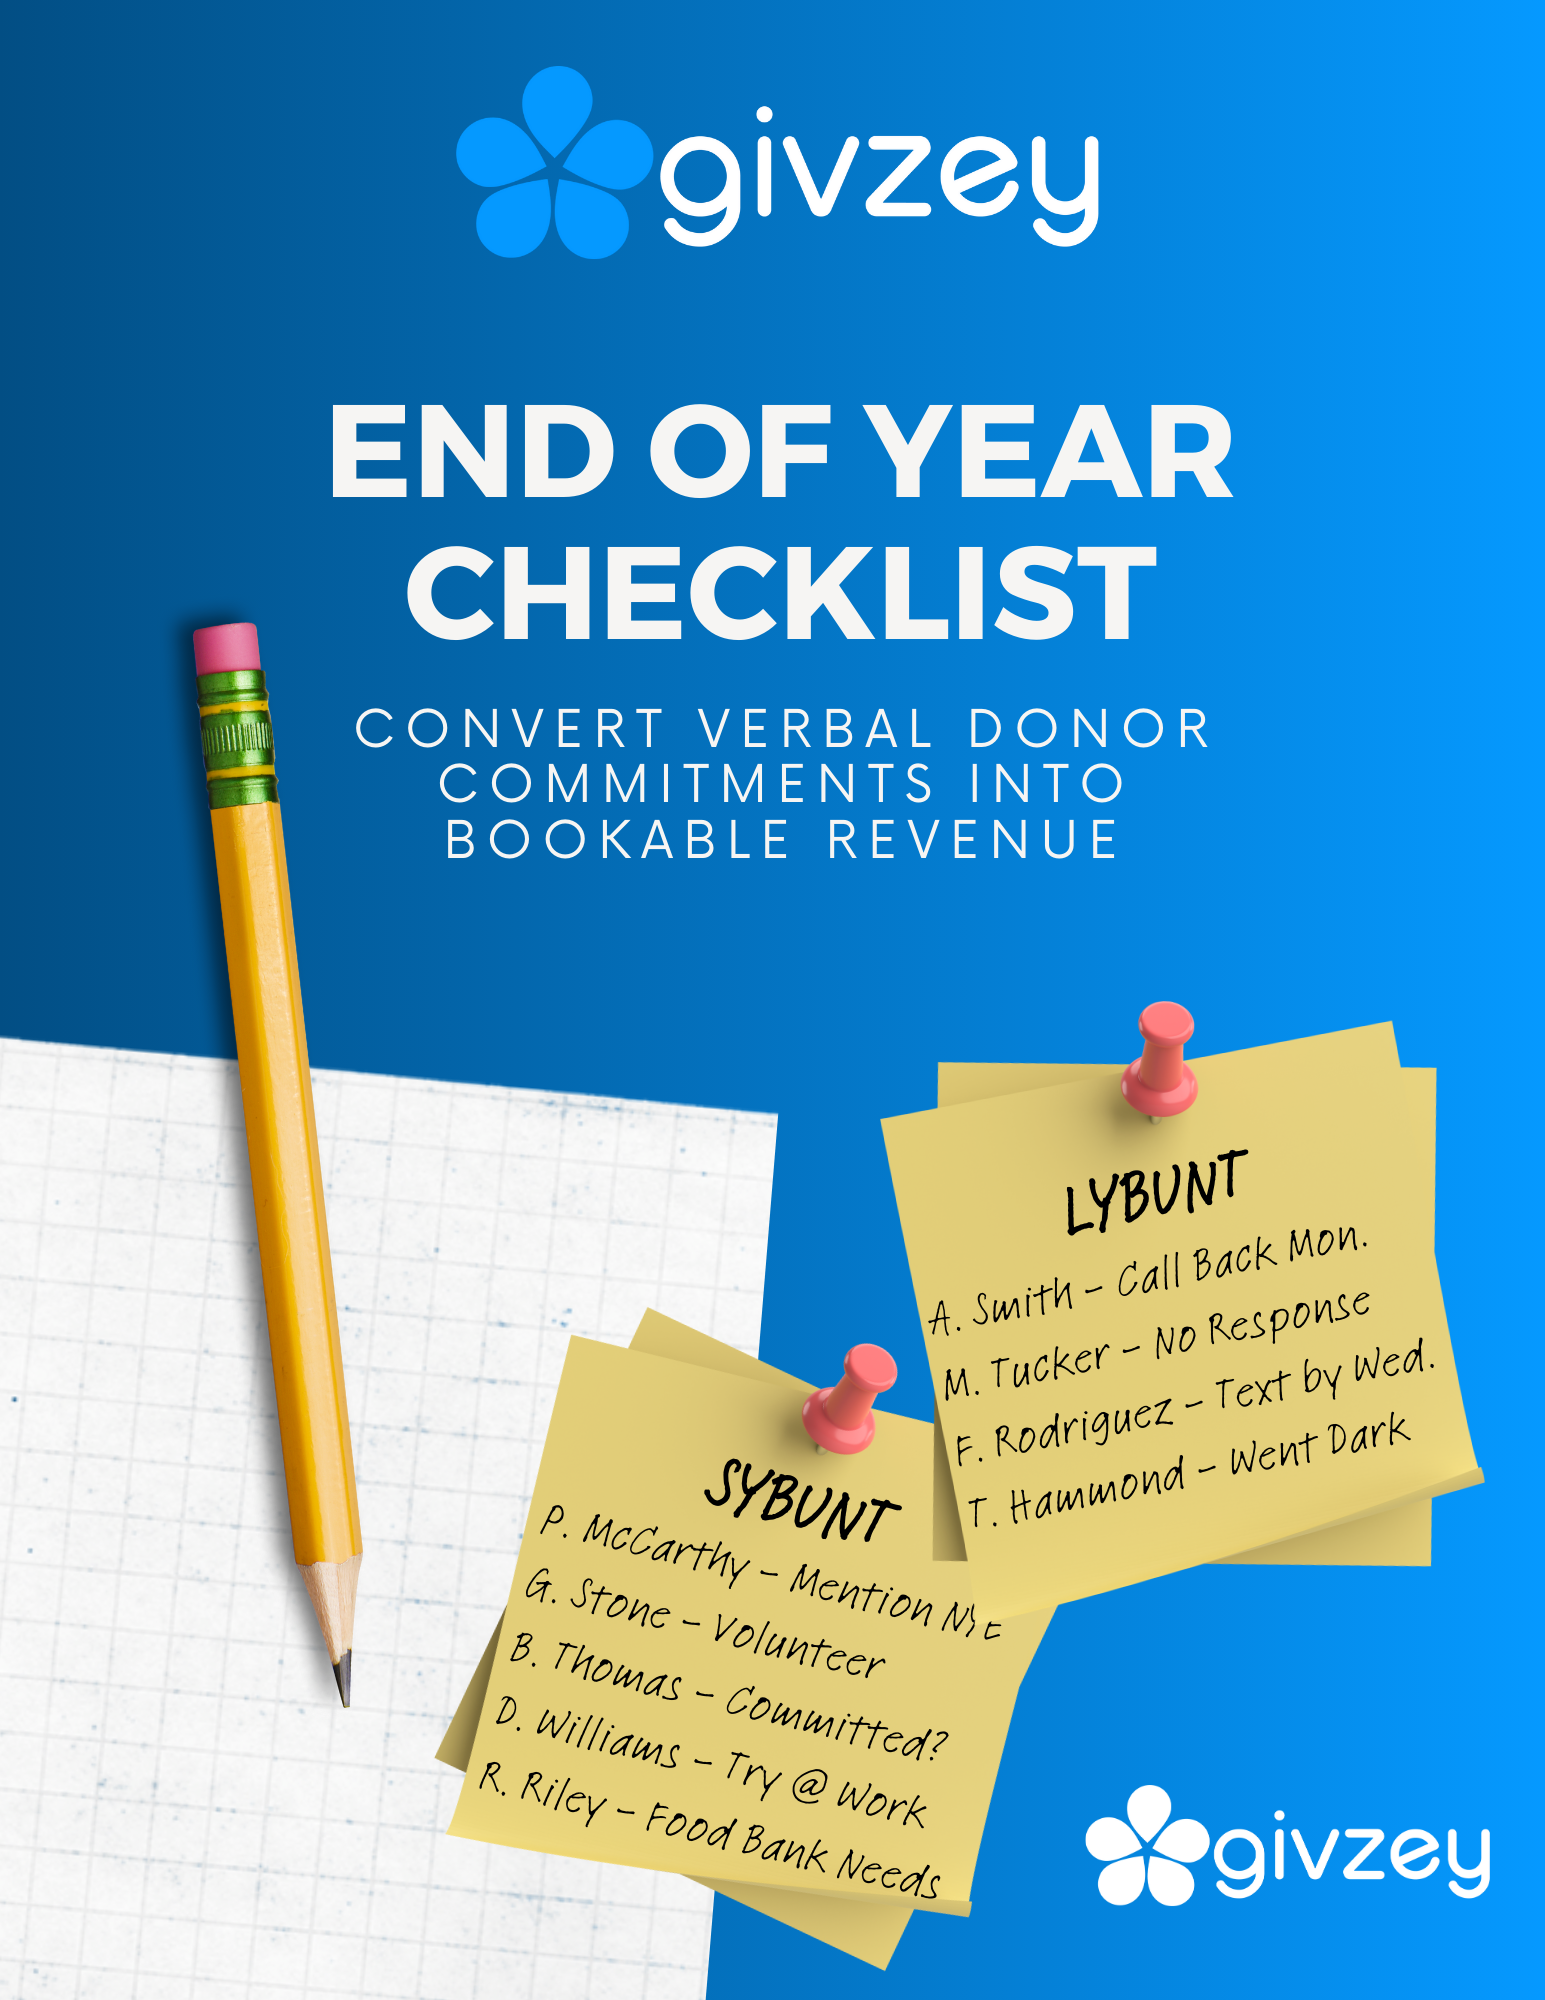 Givzey - End of Year Checklist Cover